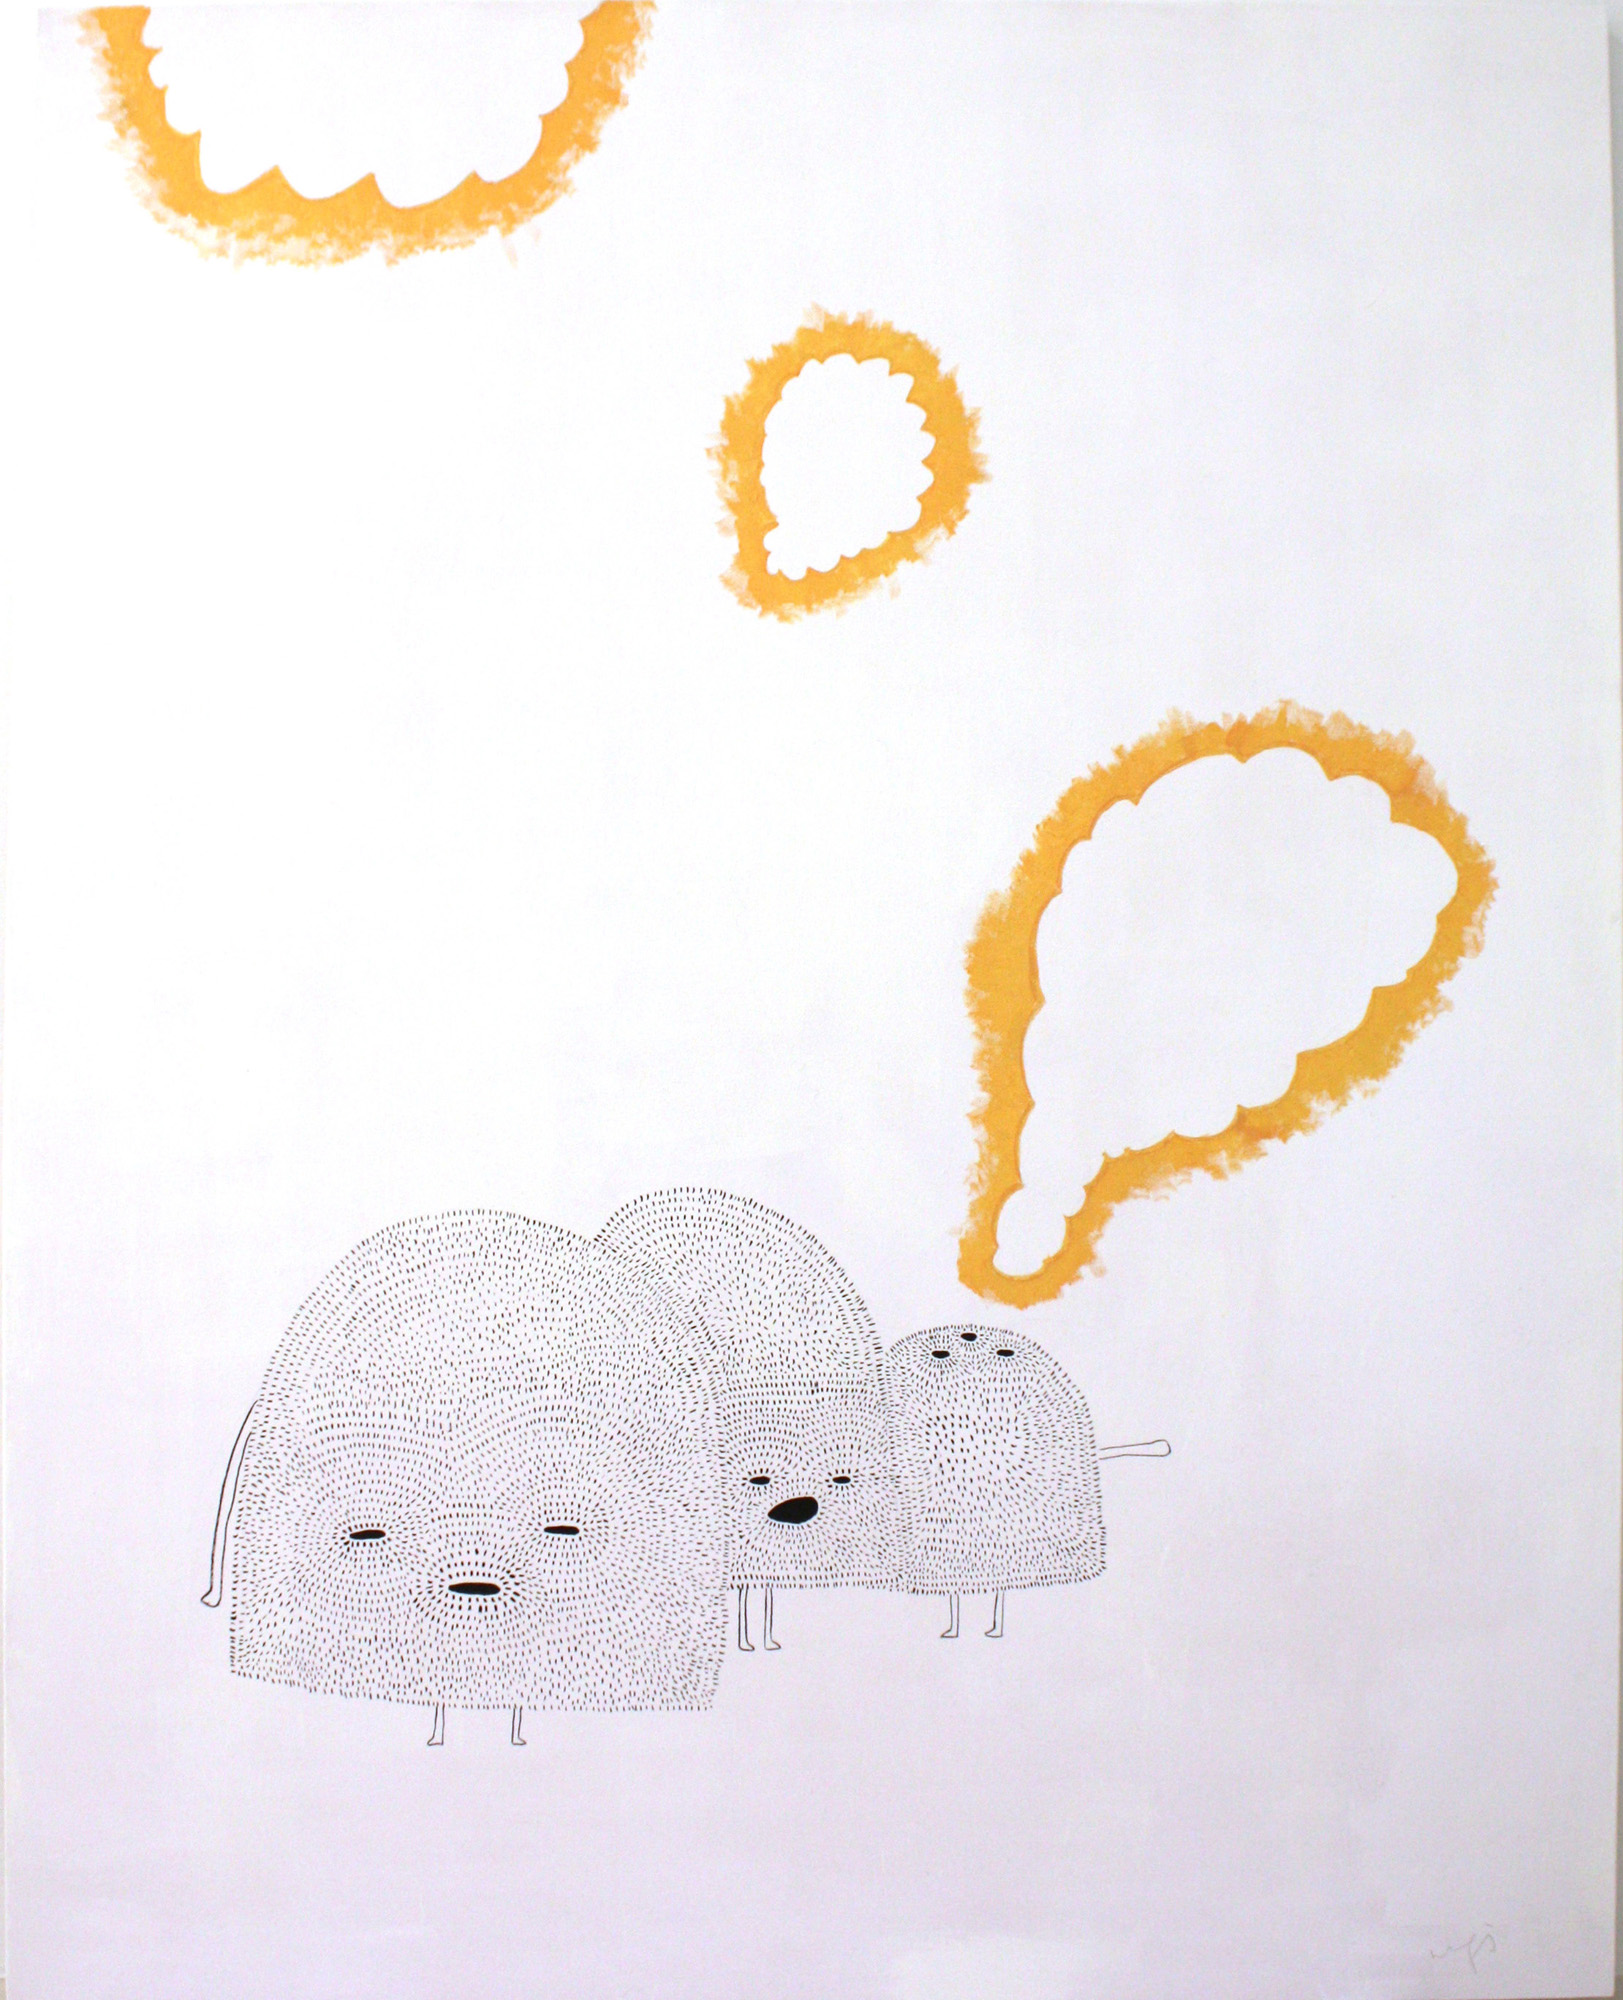 Untitled, 2011, mixed media on canvas, 162 x 130 cm.